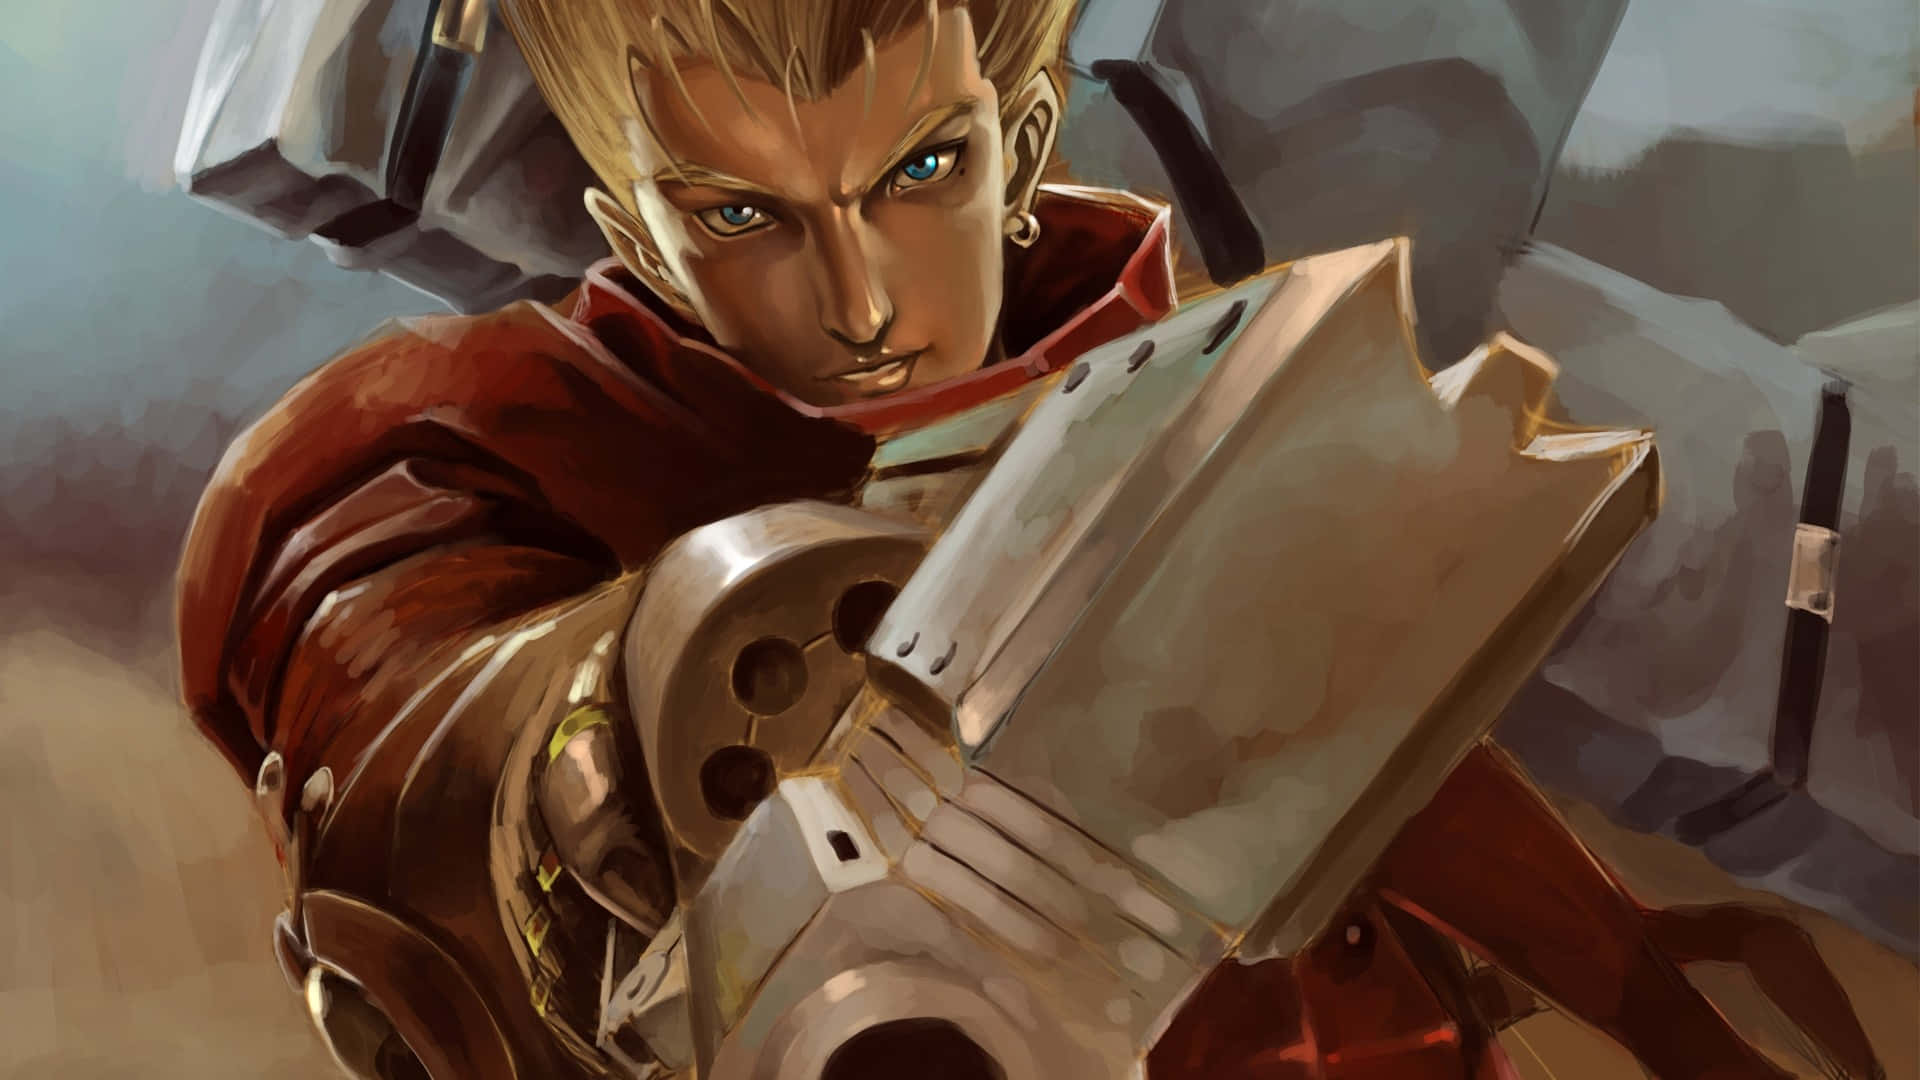 Vash the Stampede - Intense Stare in the Face of Danger Wallpaper